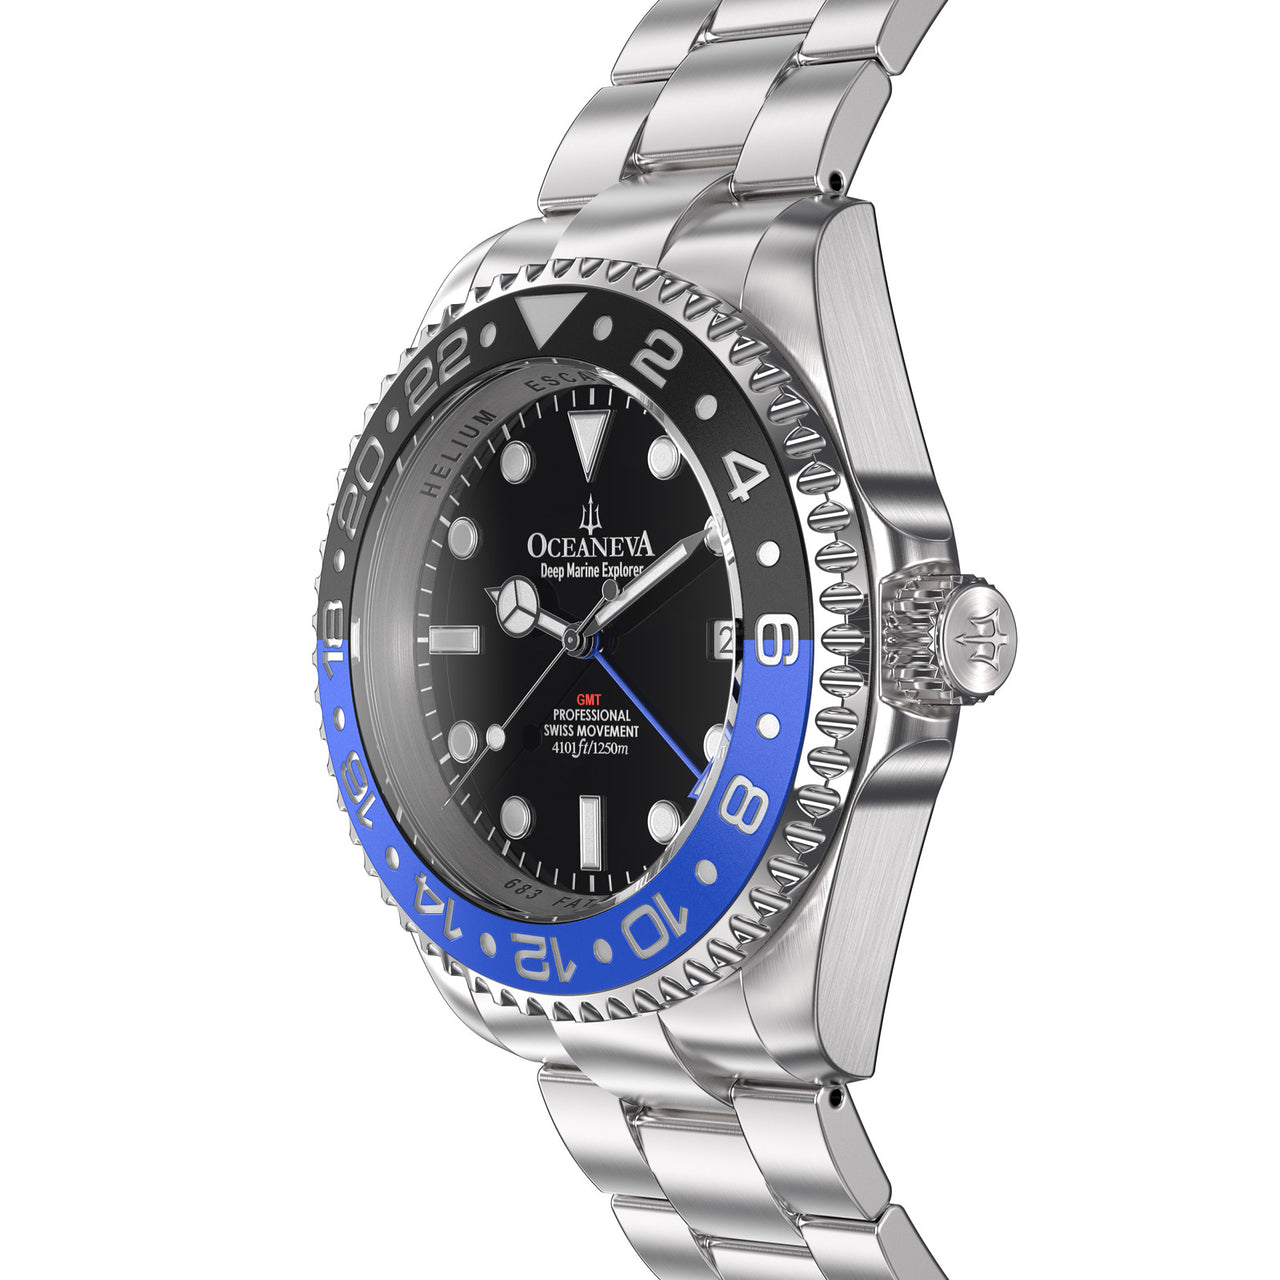 Oceaneva 1250M GMT Dive Watch Blue And Black Side View Crown